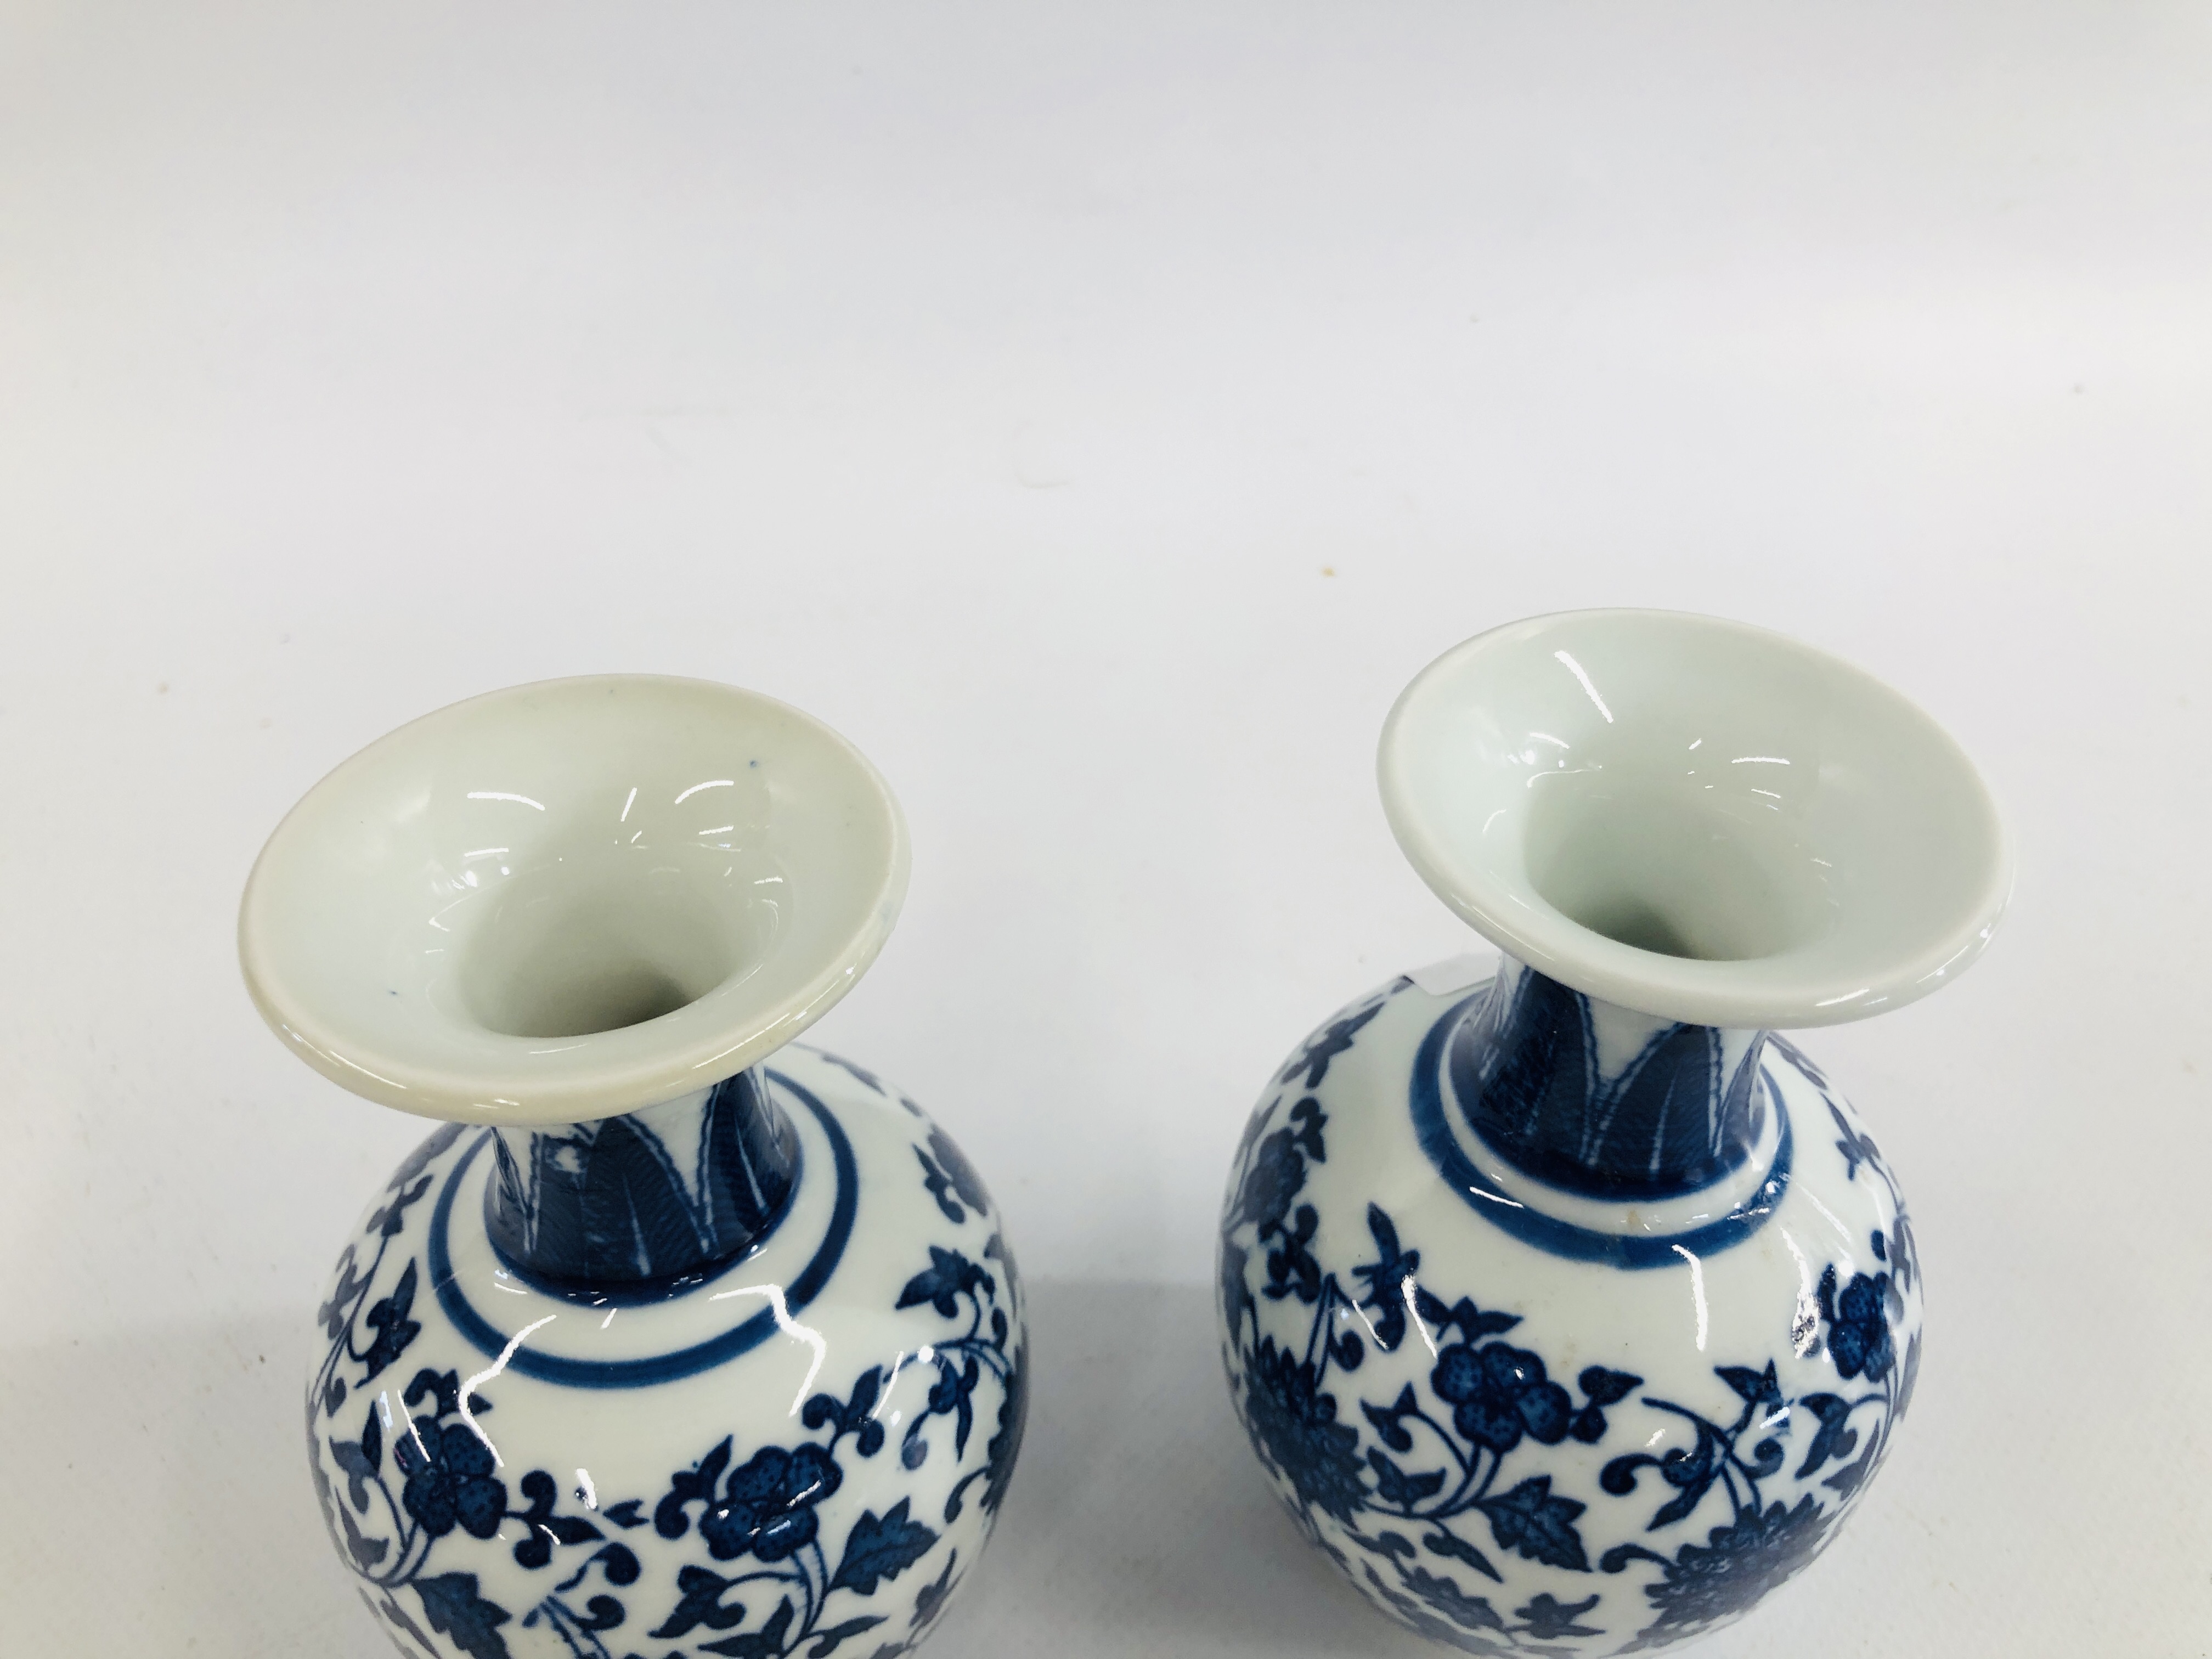 A PAIR OF CHINESE BLUE AND WHITE VASES OF BALUSTER FORM WITH FLARED RIMS BEARING "KANXI" SEAL MARK, - Image 2 of 5